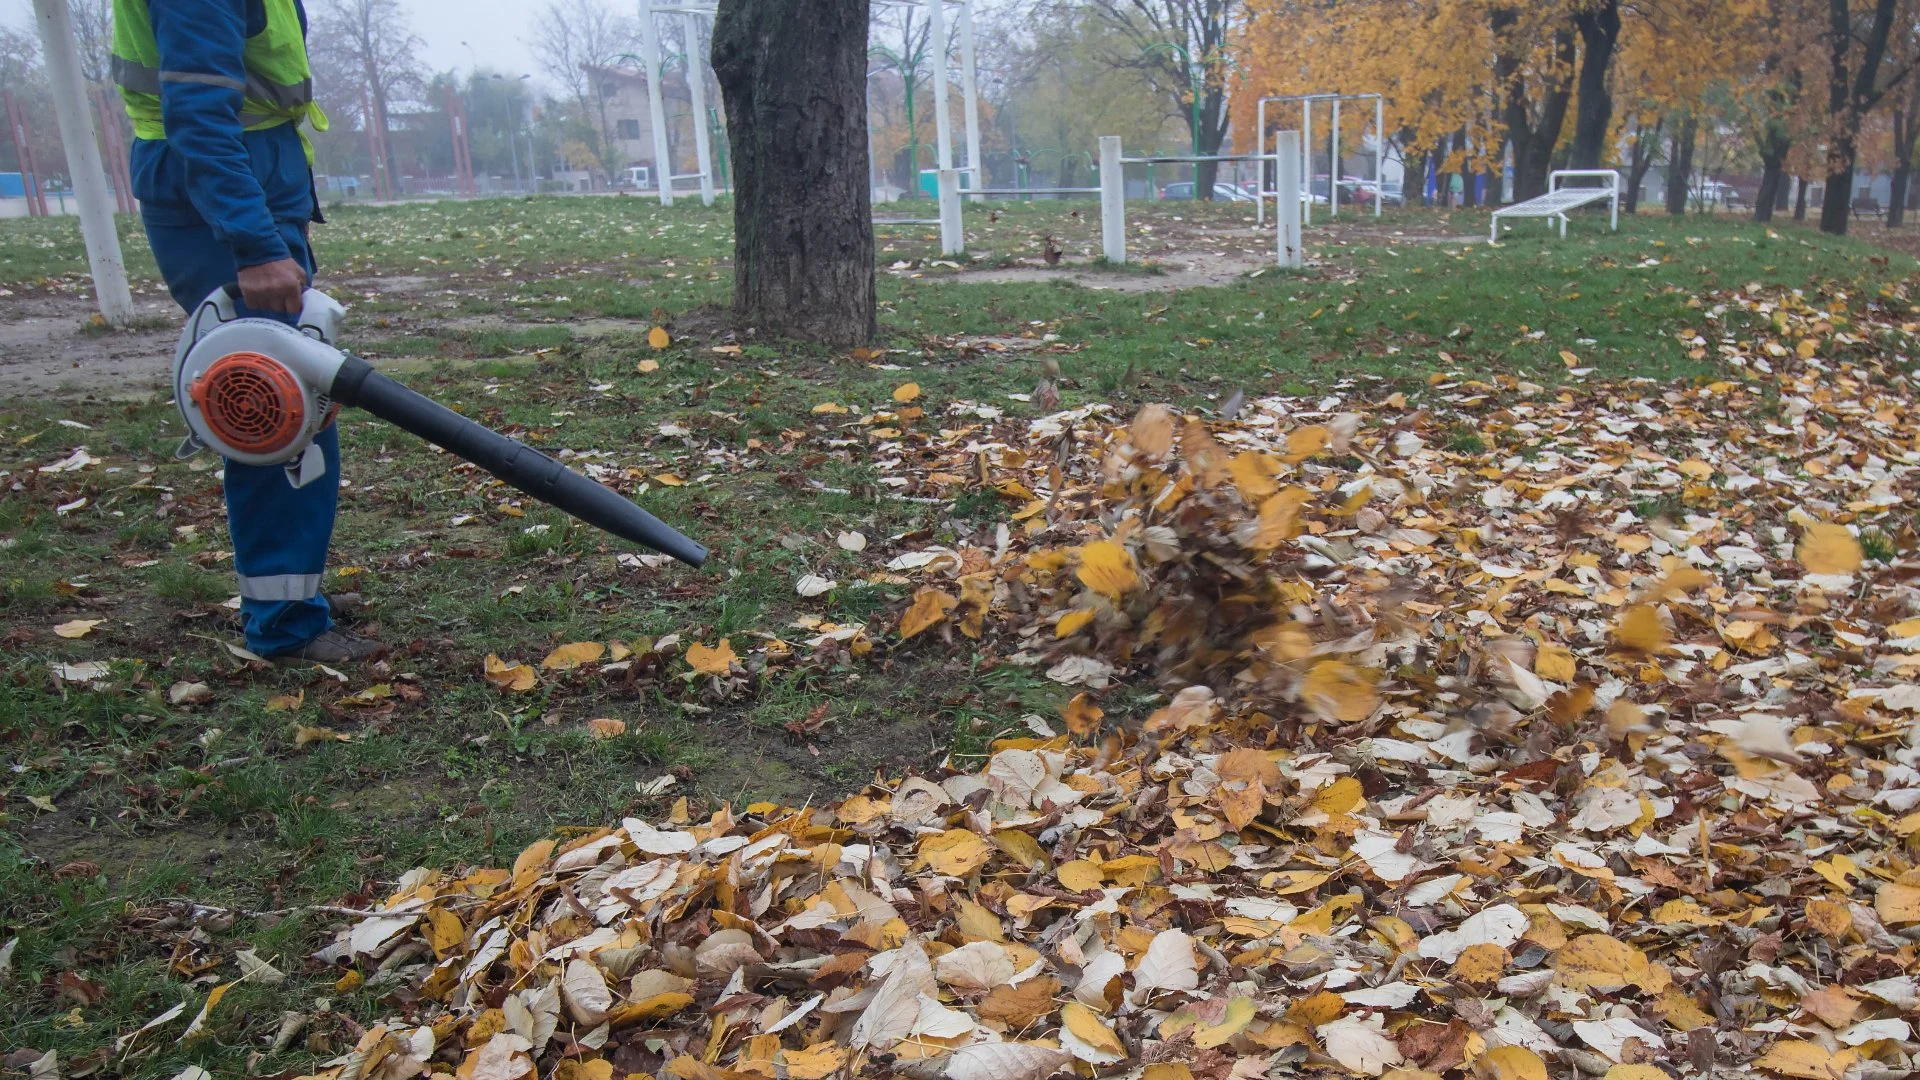 What Is the Best Way to Clean up Leaves?